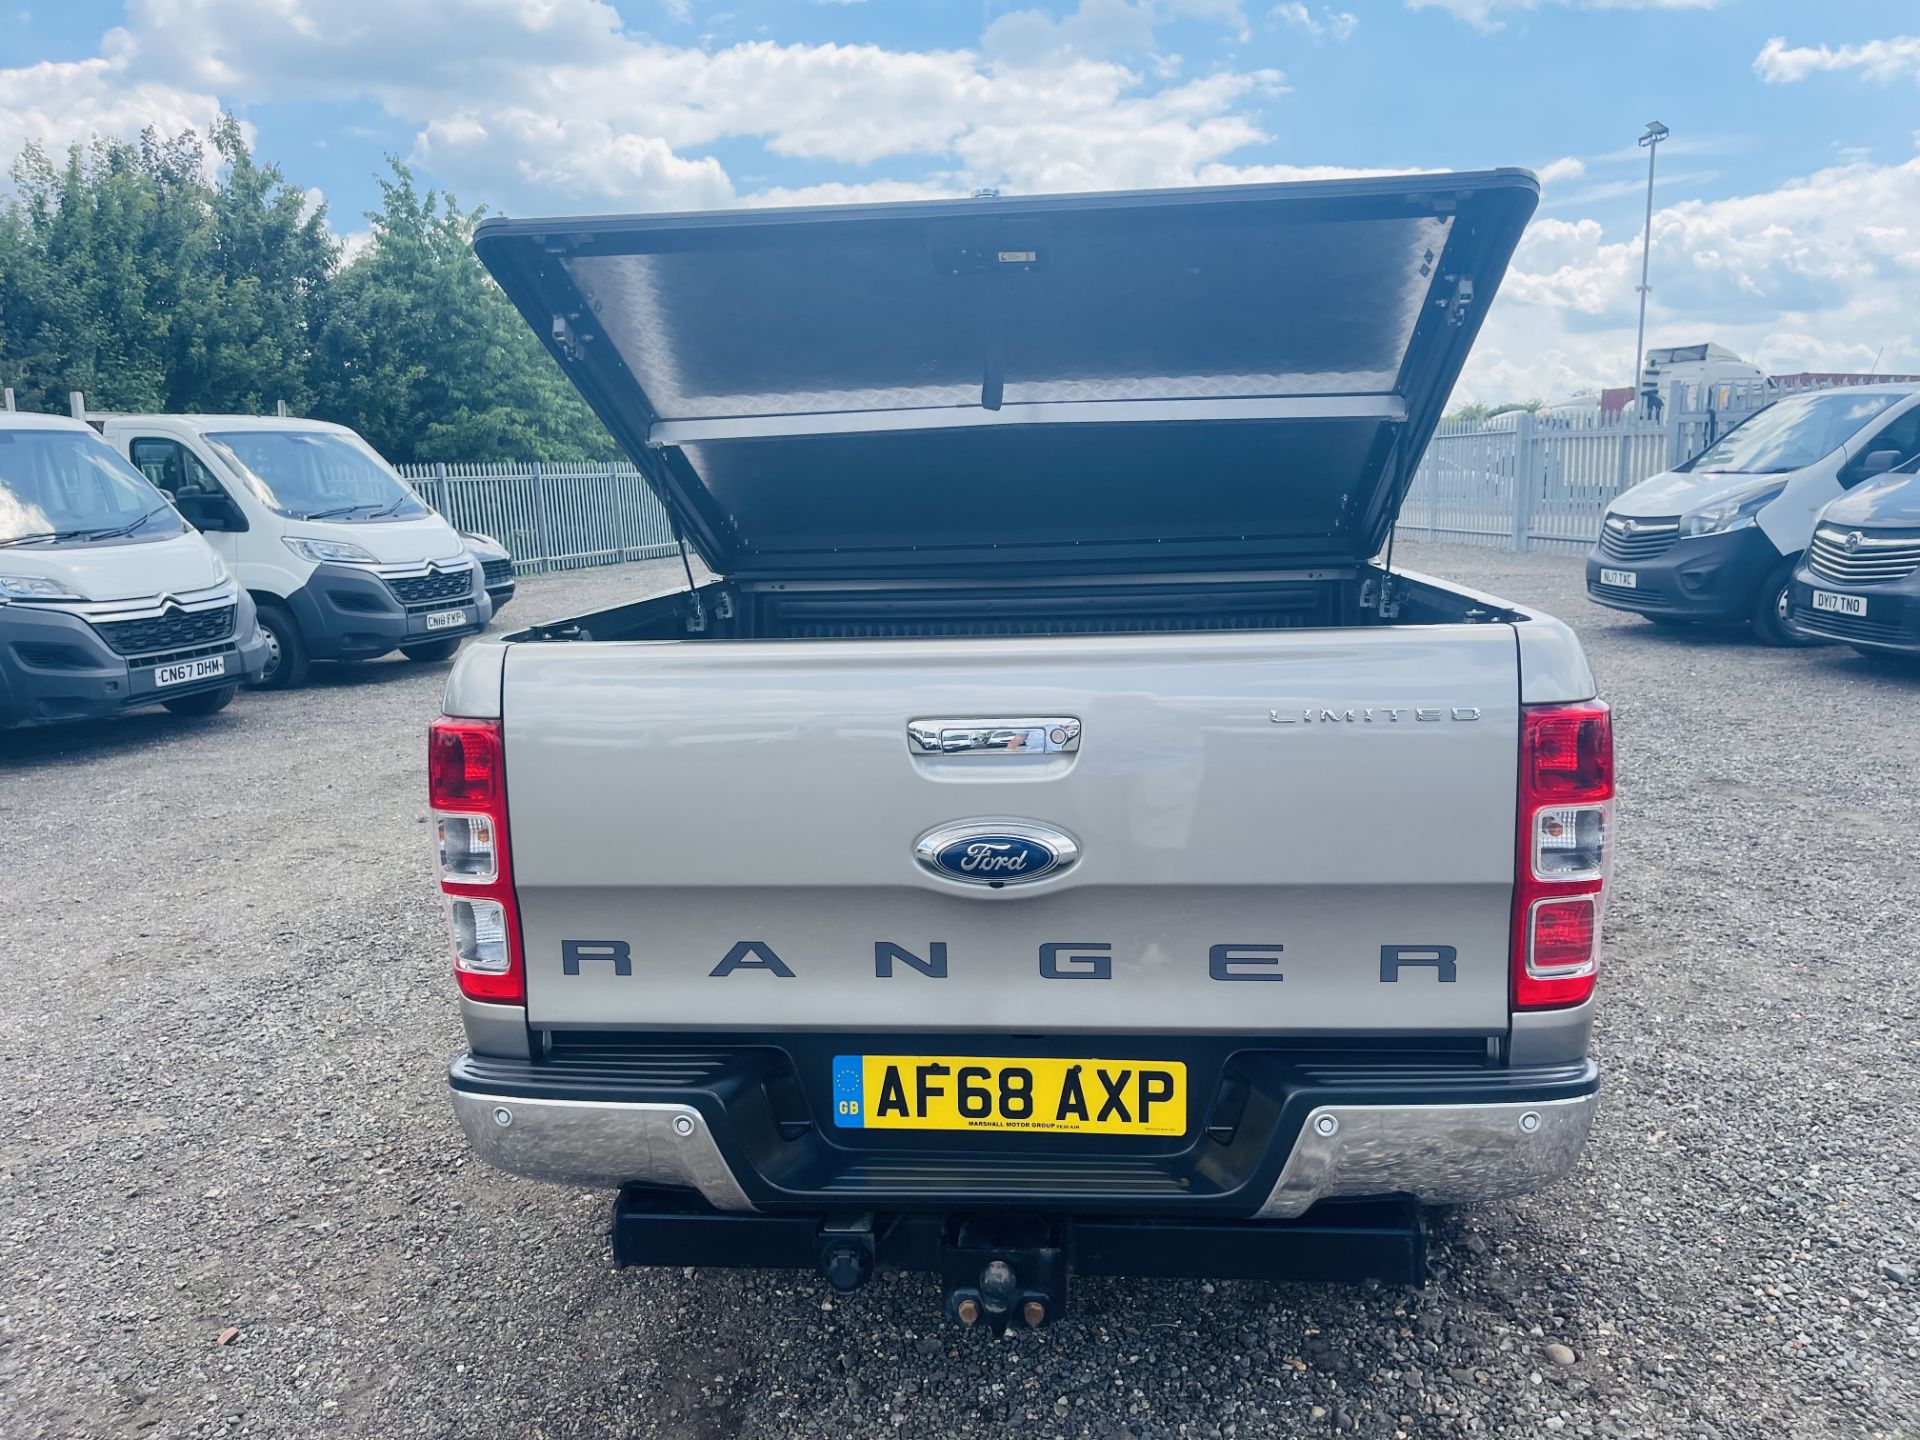 ** ON SALE ** Ford Ranger 3.2 TDCI Limited 2018 '68 Reg' Auto 4WD - Sat Nav - A/C - Euro 6 - Image 19 of 35